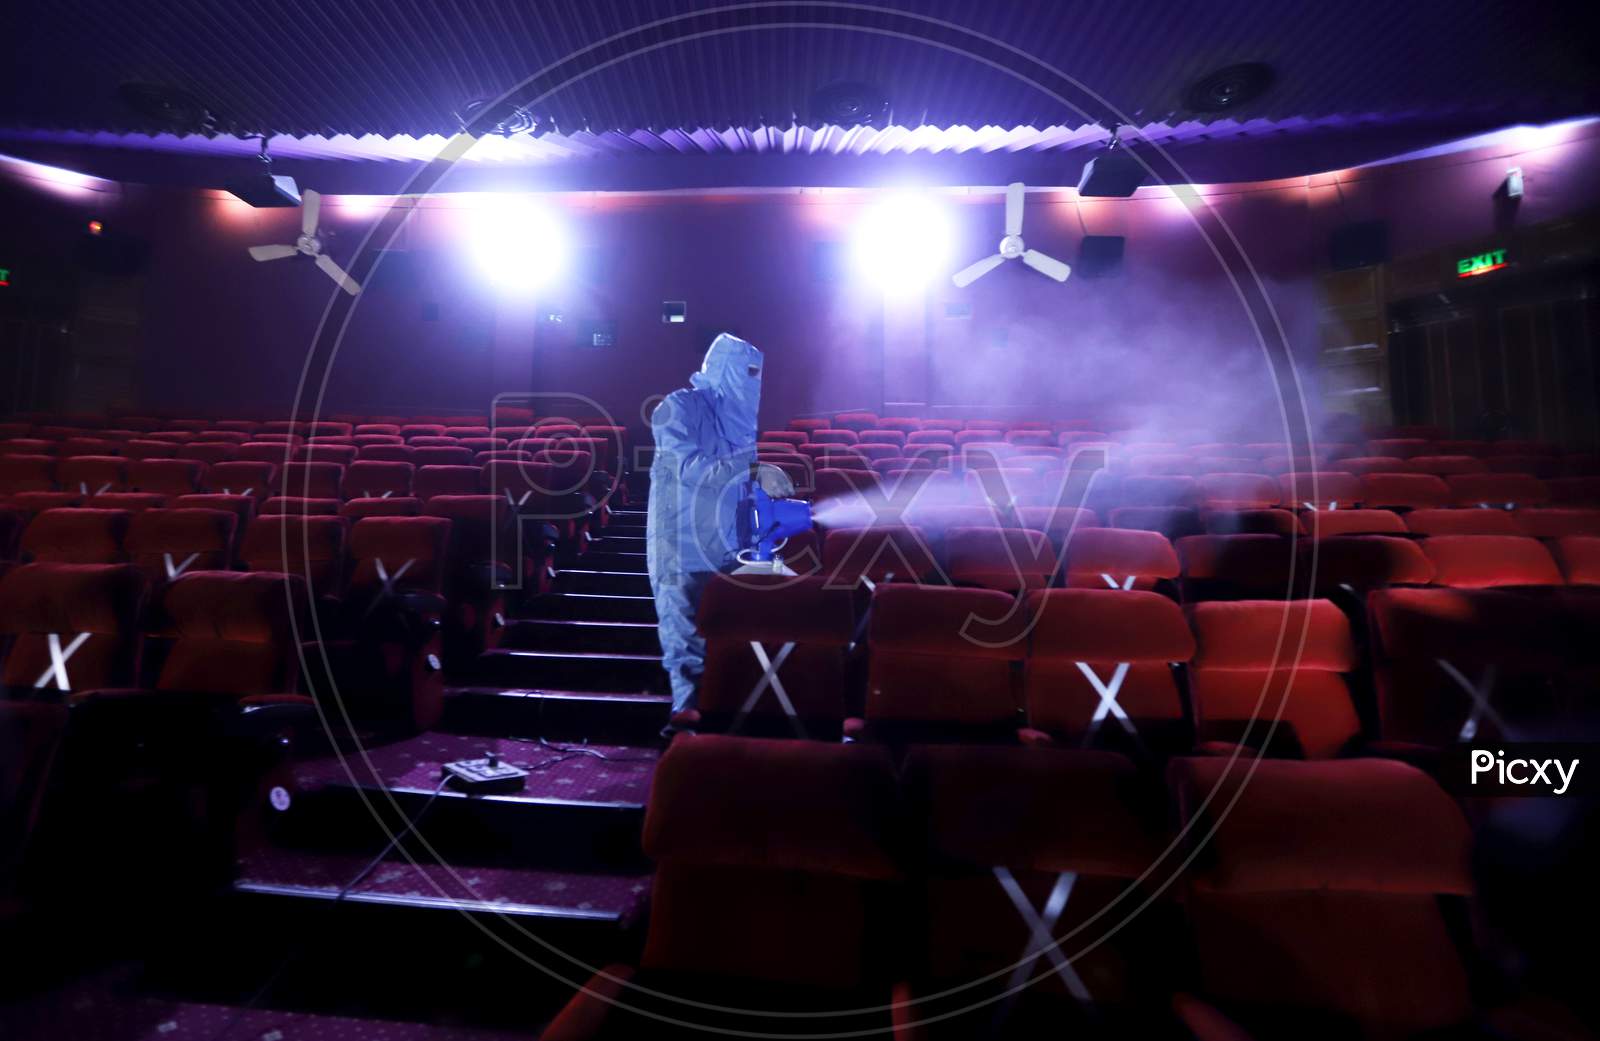 A worker sanitises inside a theatre hall ahead of the scheduled reopening of cinema theatres on October 15 as the Covid-19 coronavirus imposed lockdown eases further in New Delhi on October 13, 2020.